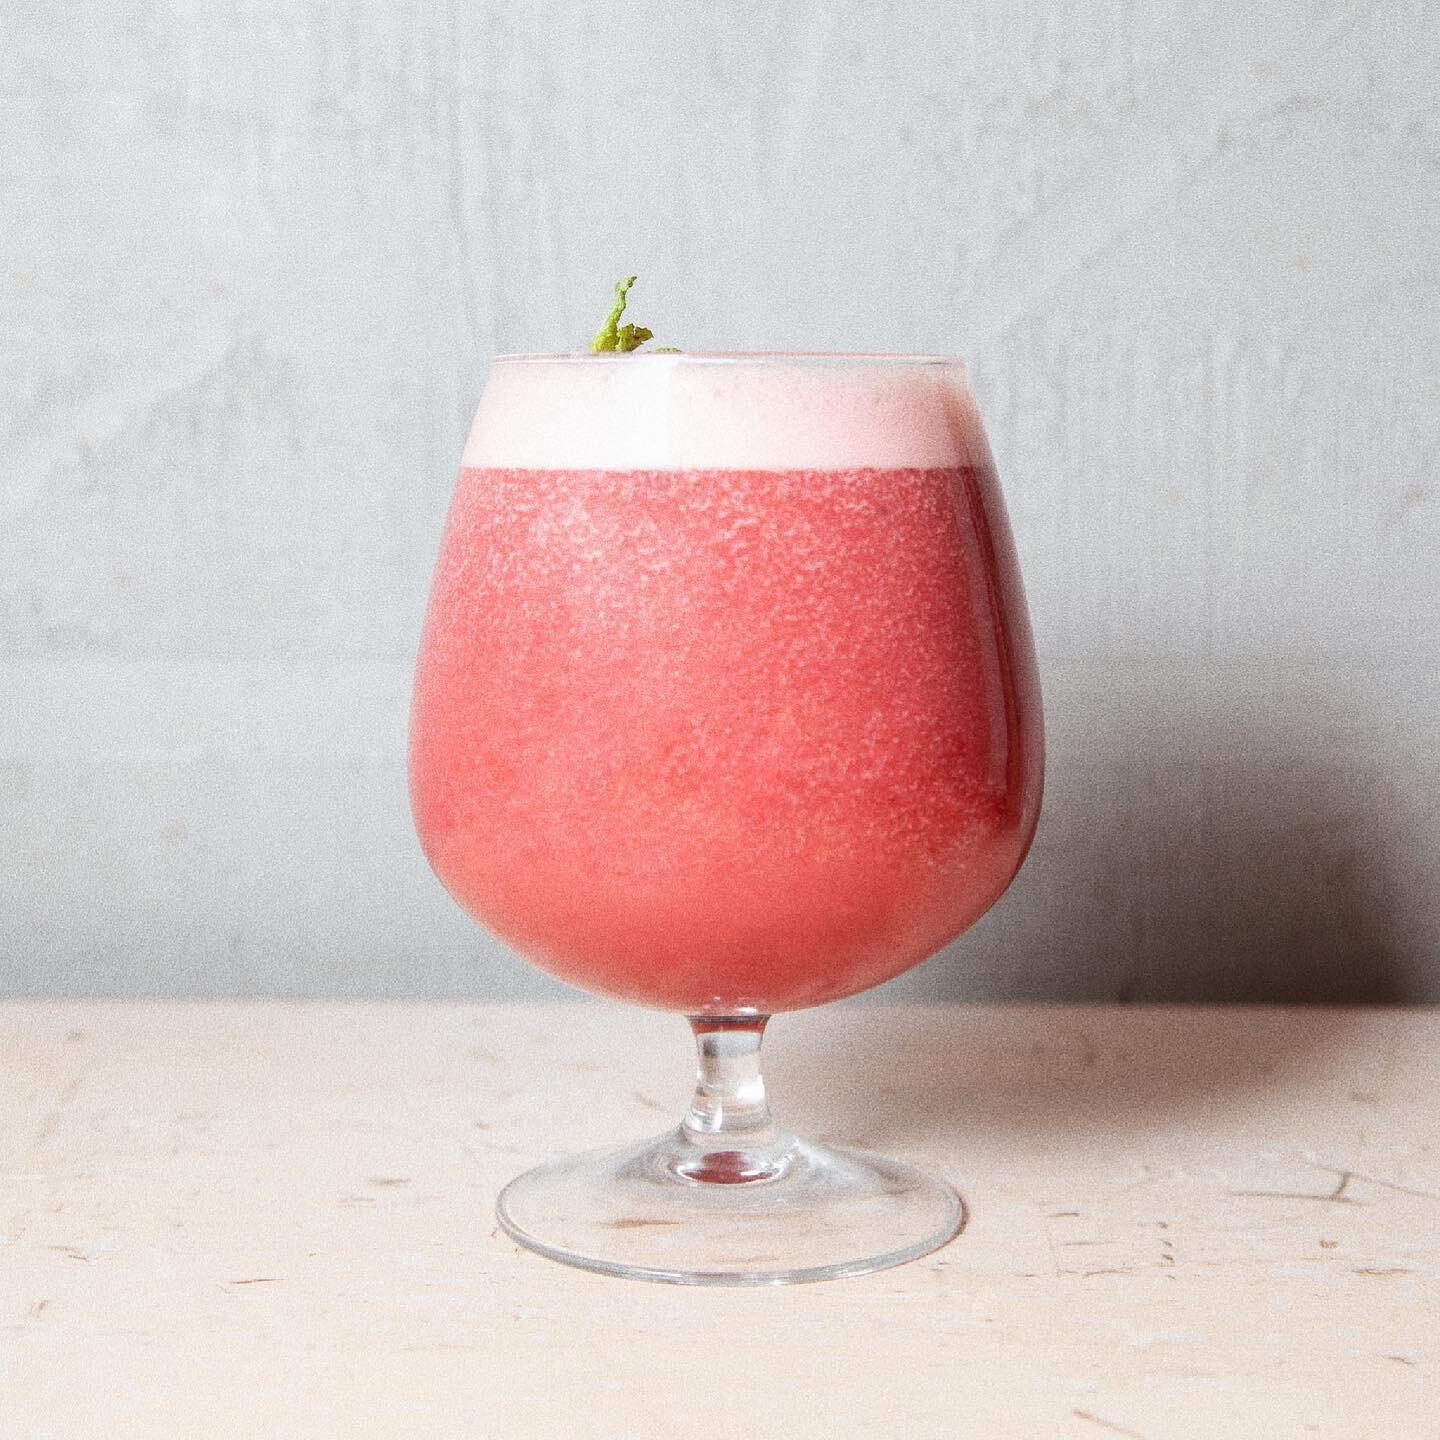 This is a LILA smoothie, a tasty blend of beetroot, orange, apple, ginger, lemon juice and some almond milk. Sounds good? Tastes better ☻

#surfhousebarcelona #shb #surfhouse #neverhungry #alwaysfrothing